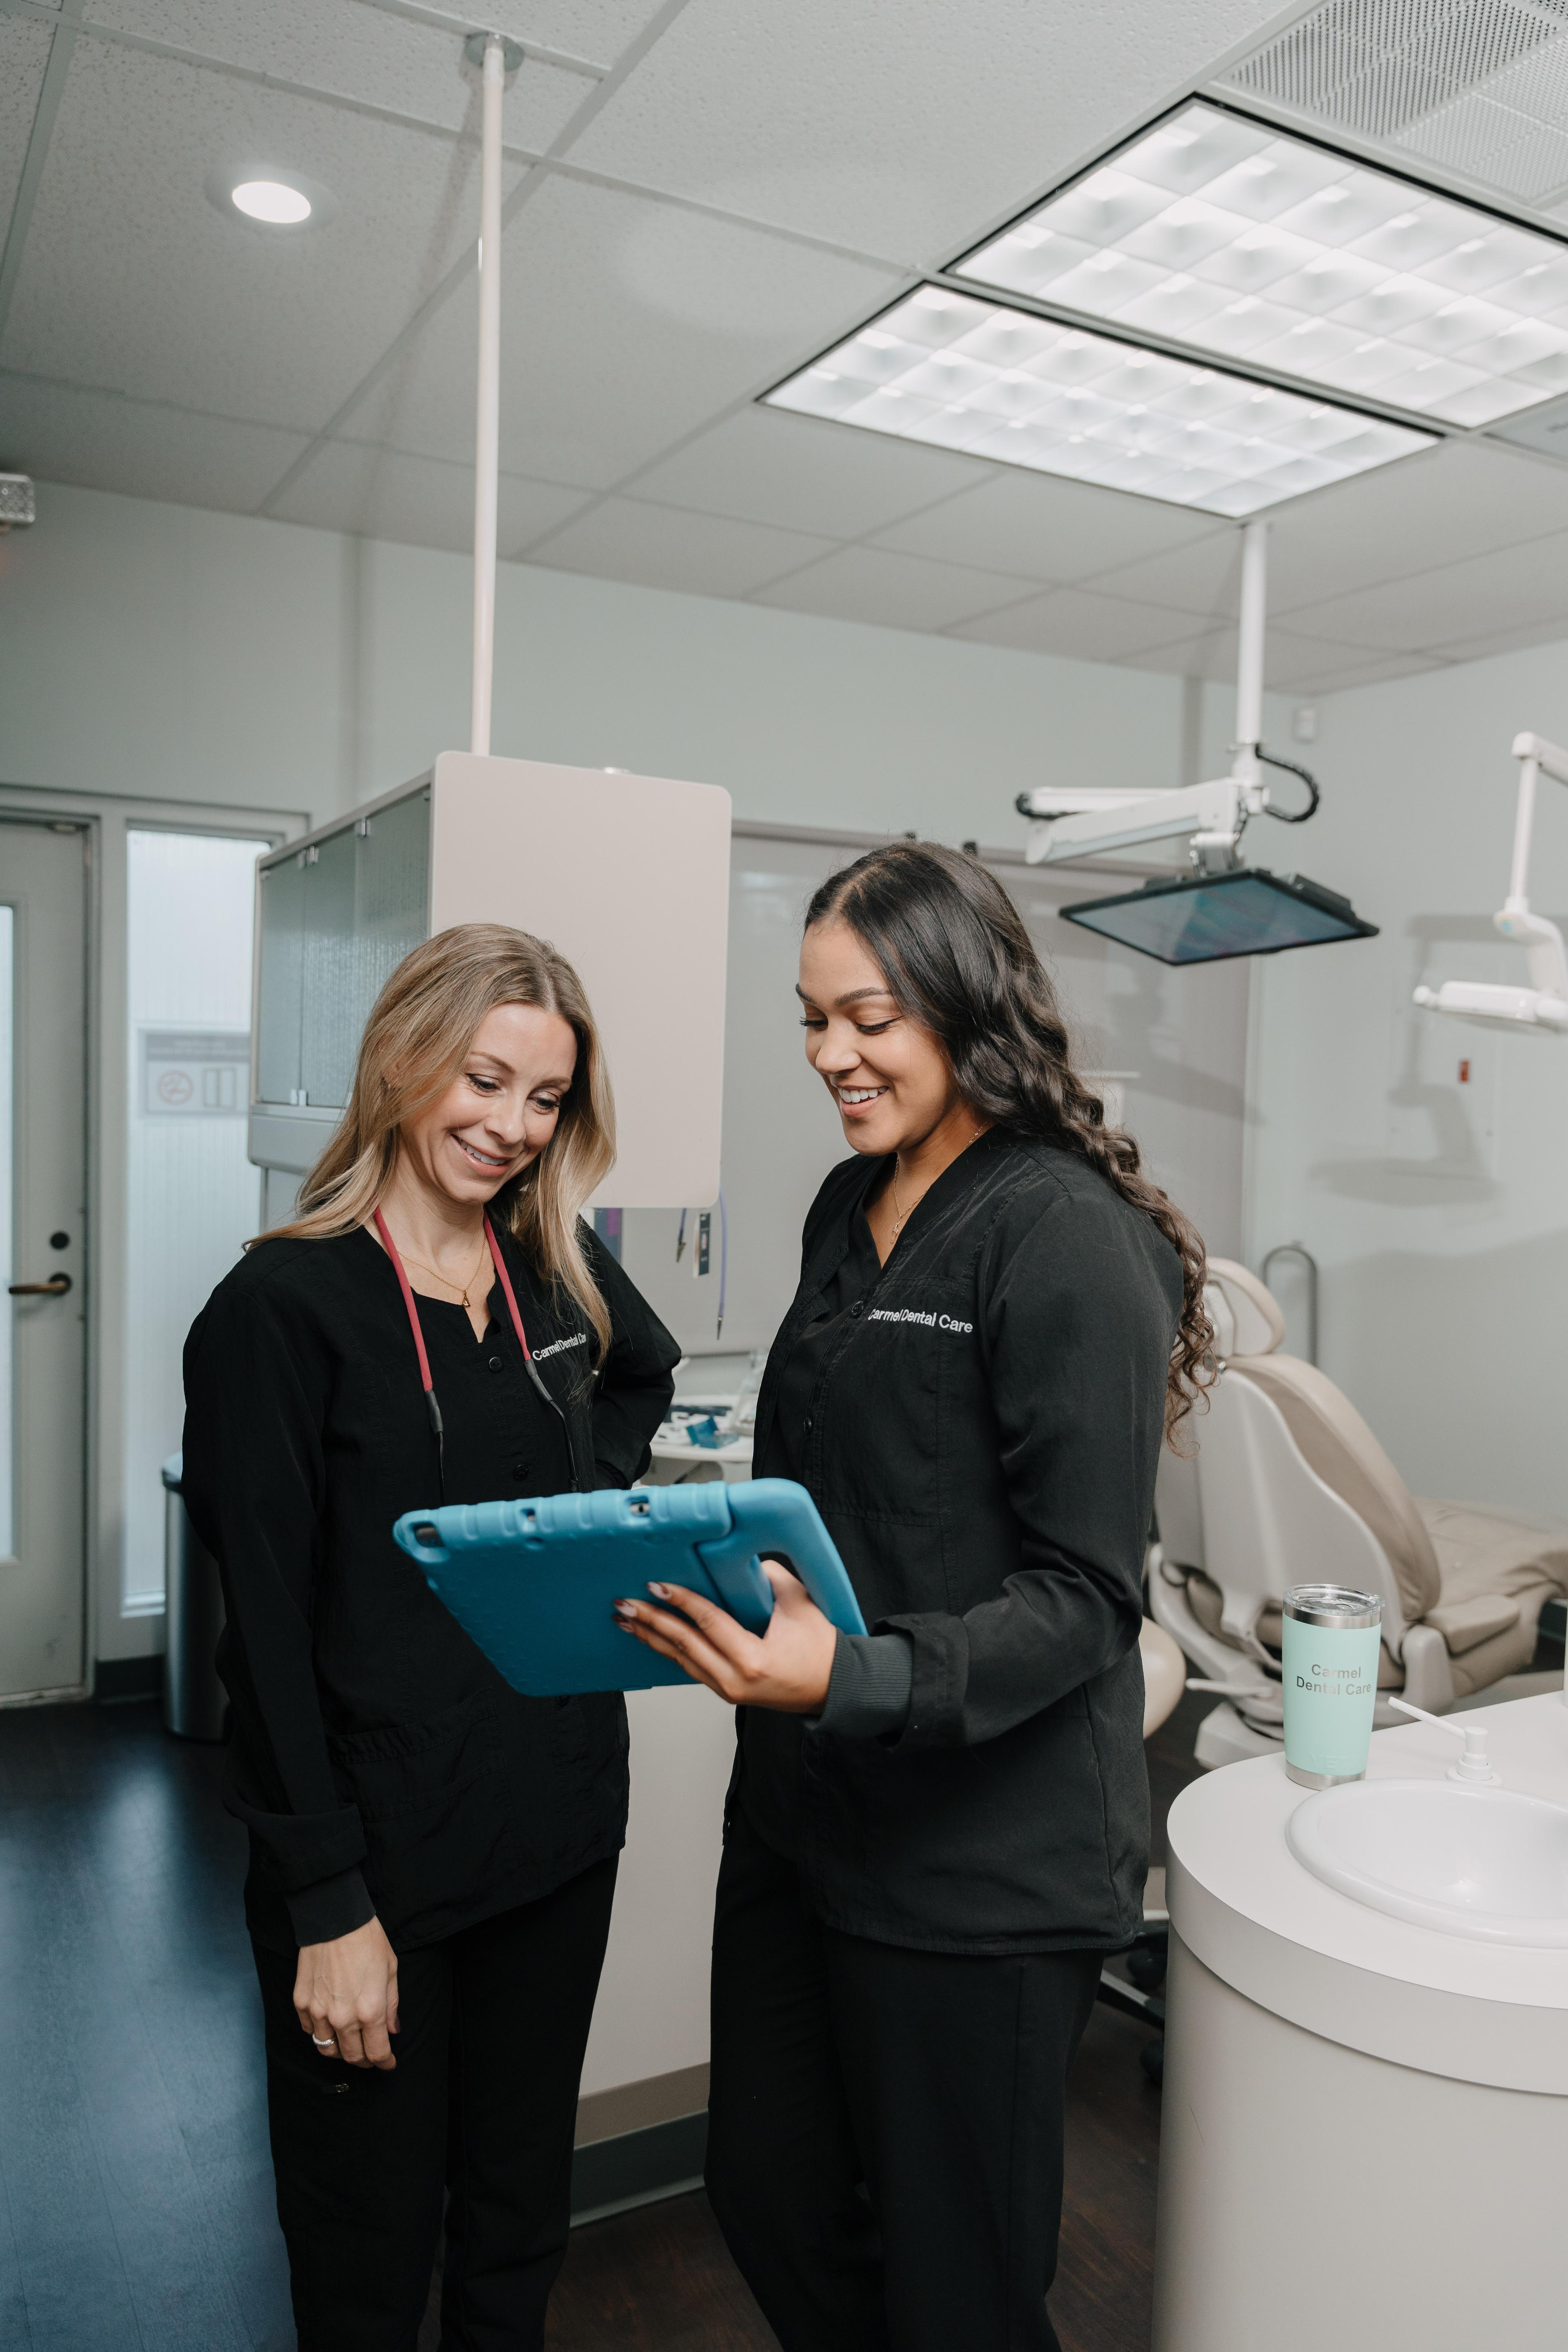 An action-packed dental procedure at Carmel Dental Care, showcasing a dentist and dental staff working together to provide exceptional oral care to a patient.